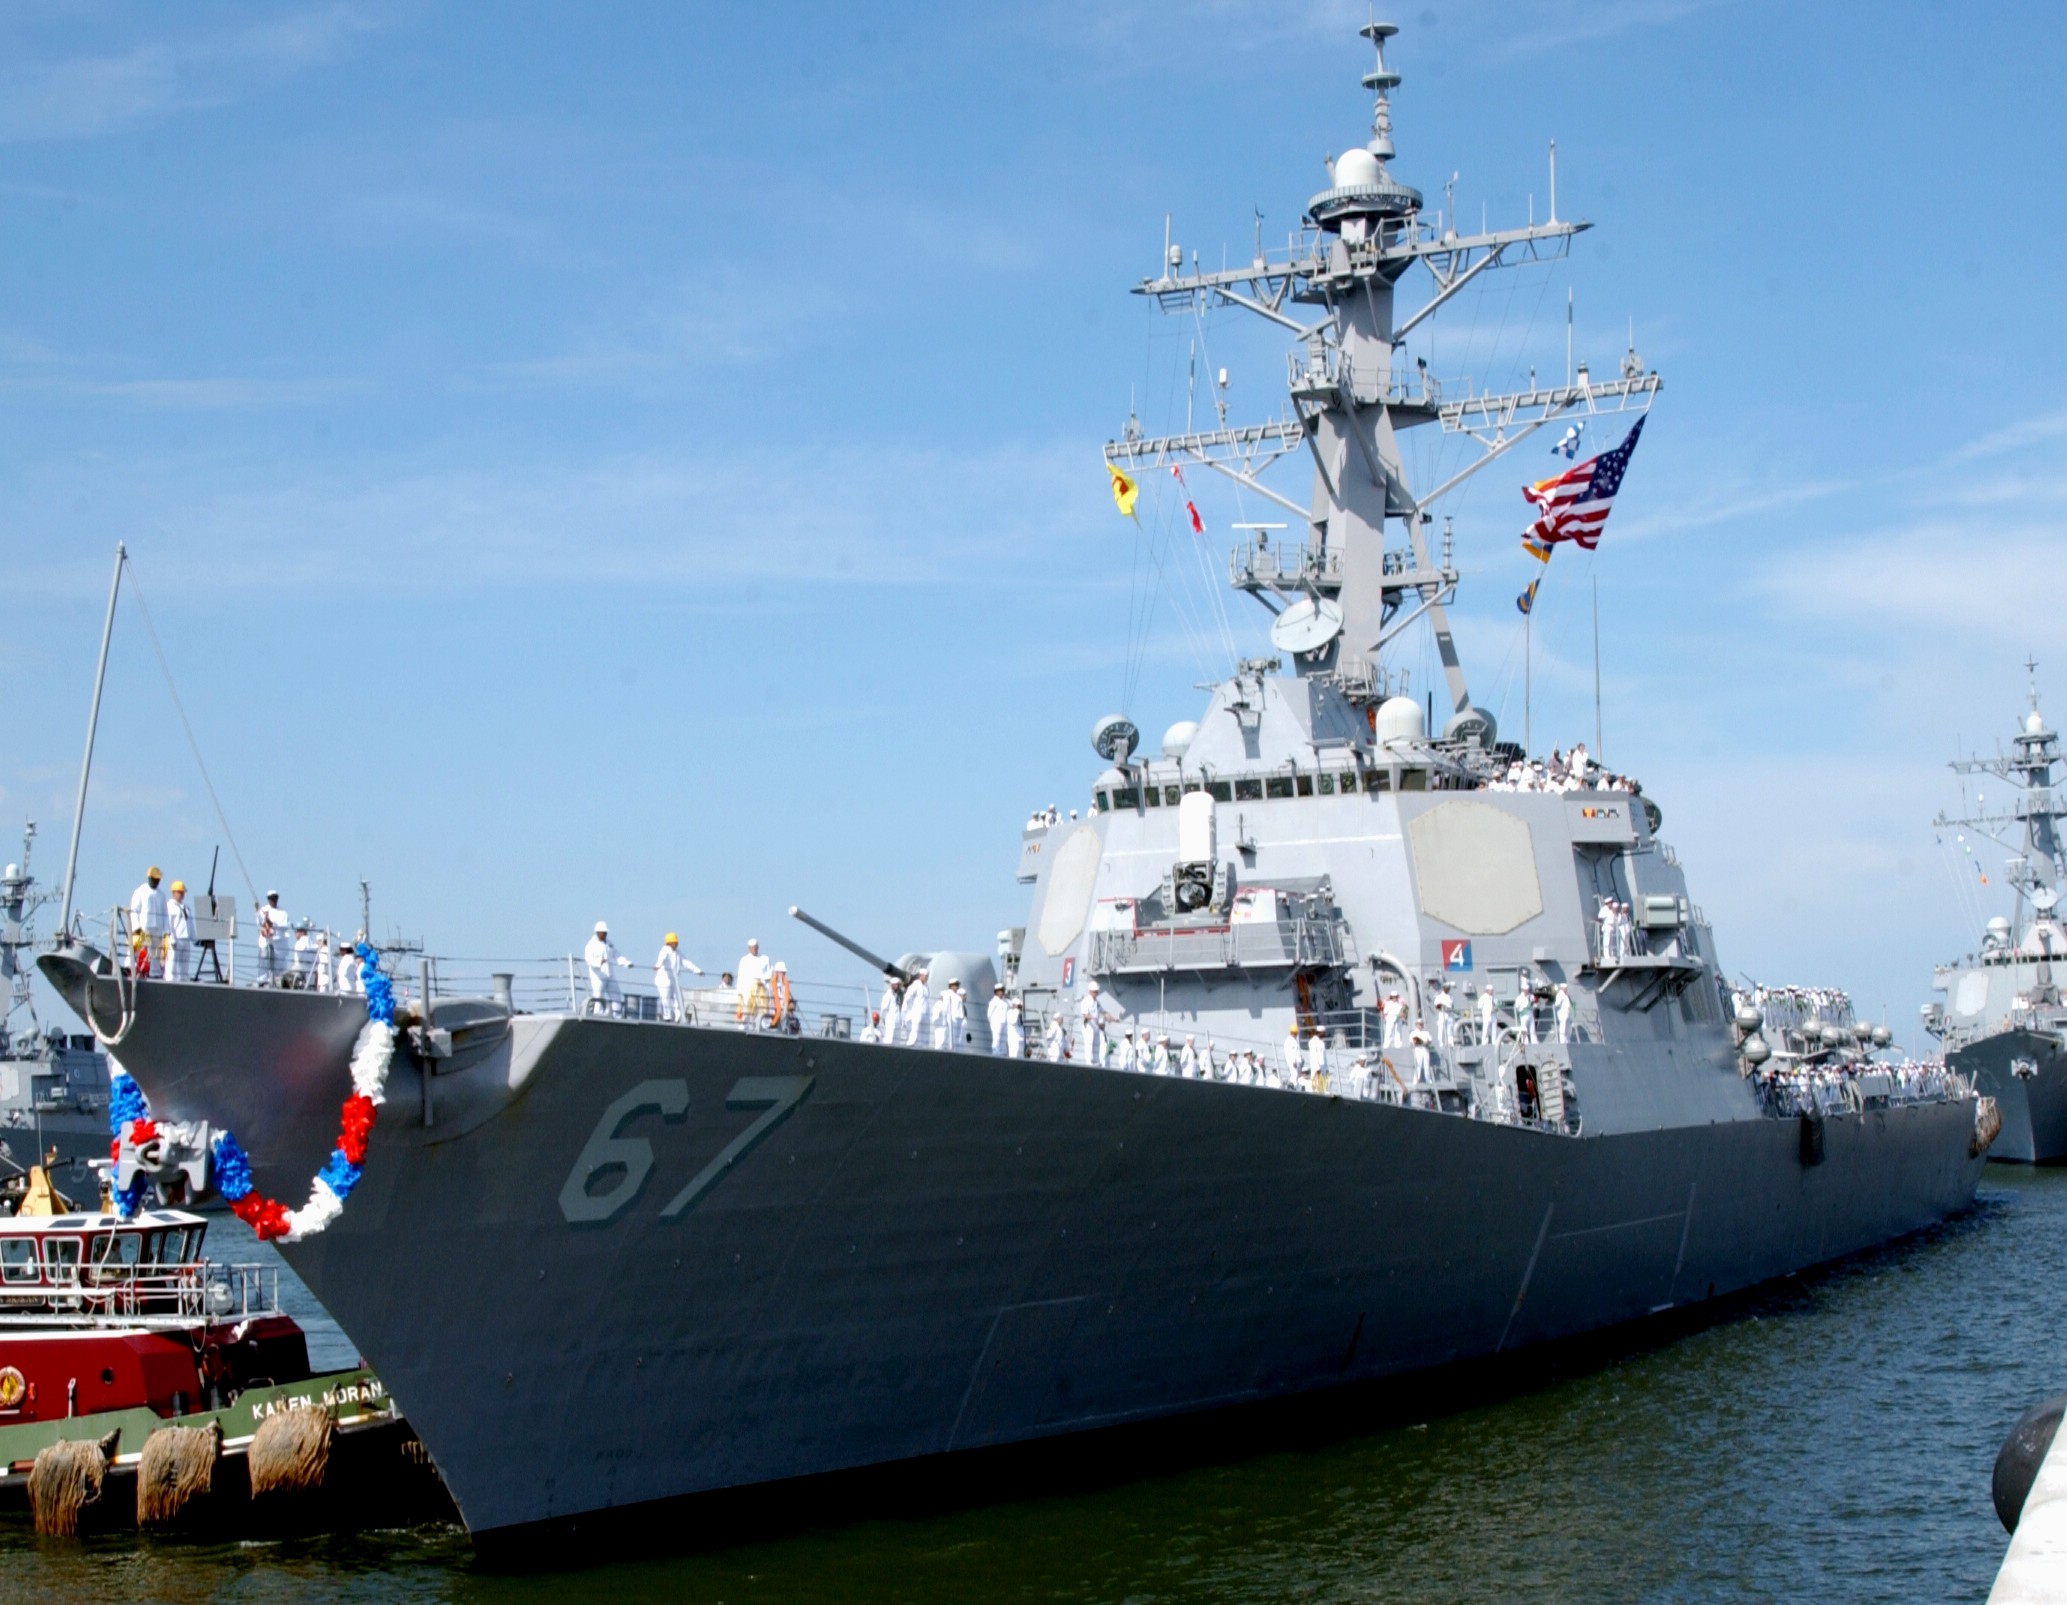 ddg-67 uss cole guided missile destroyer arleigh burke class navy aegis 37